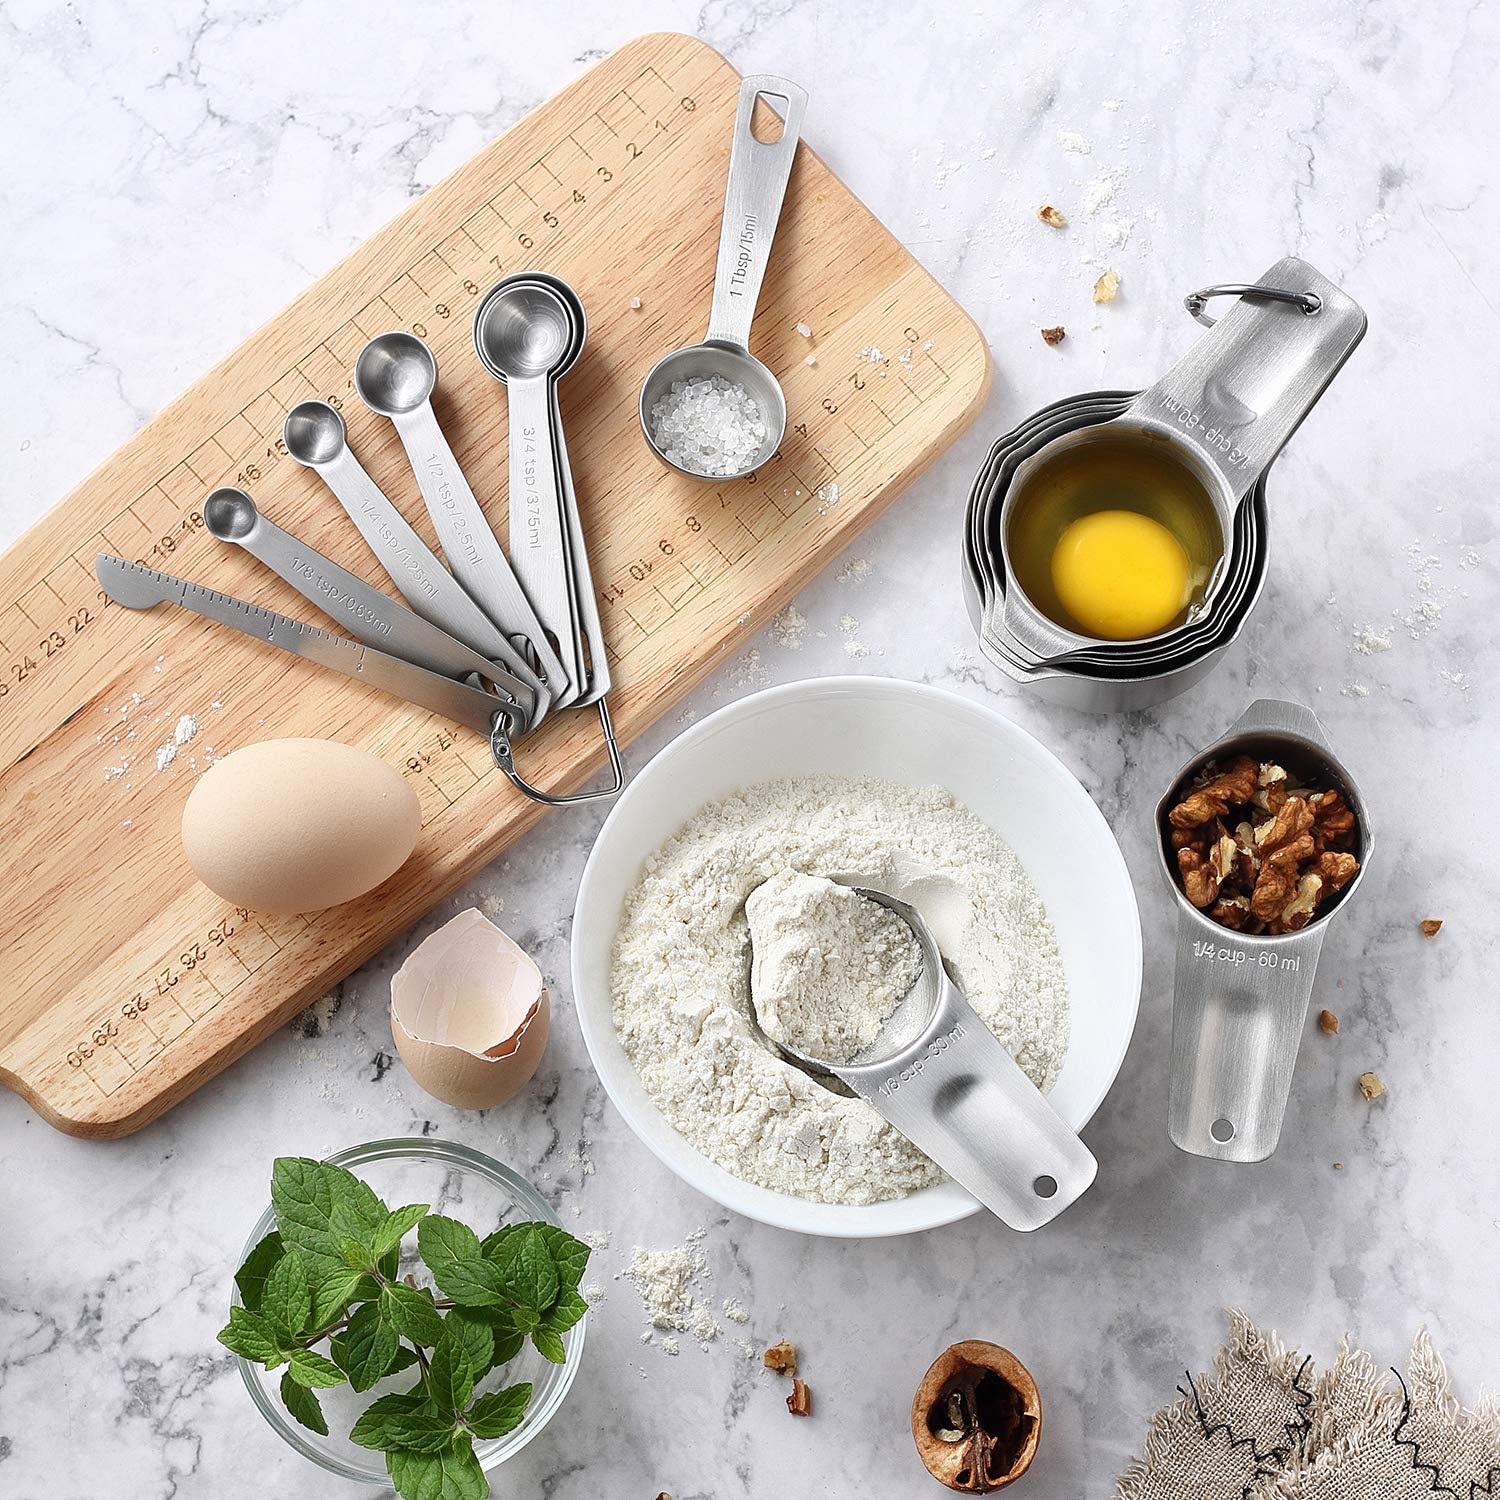 ASIN Review: Spring Chef - Stainless Steel Measuring Cups, Kitchen